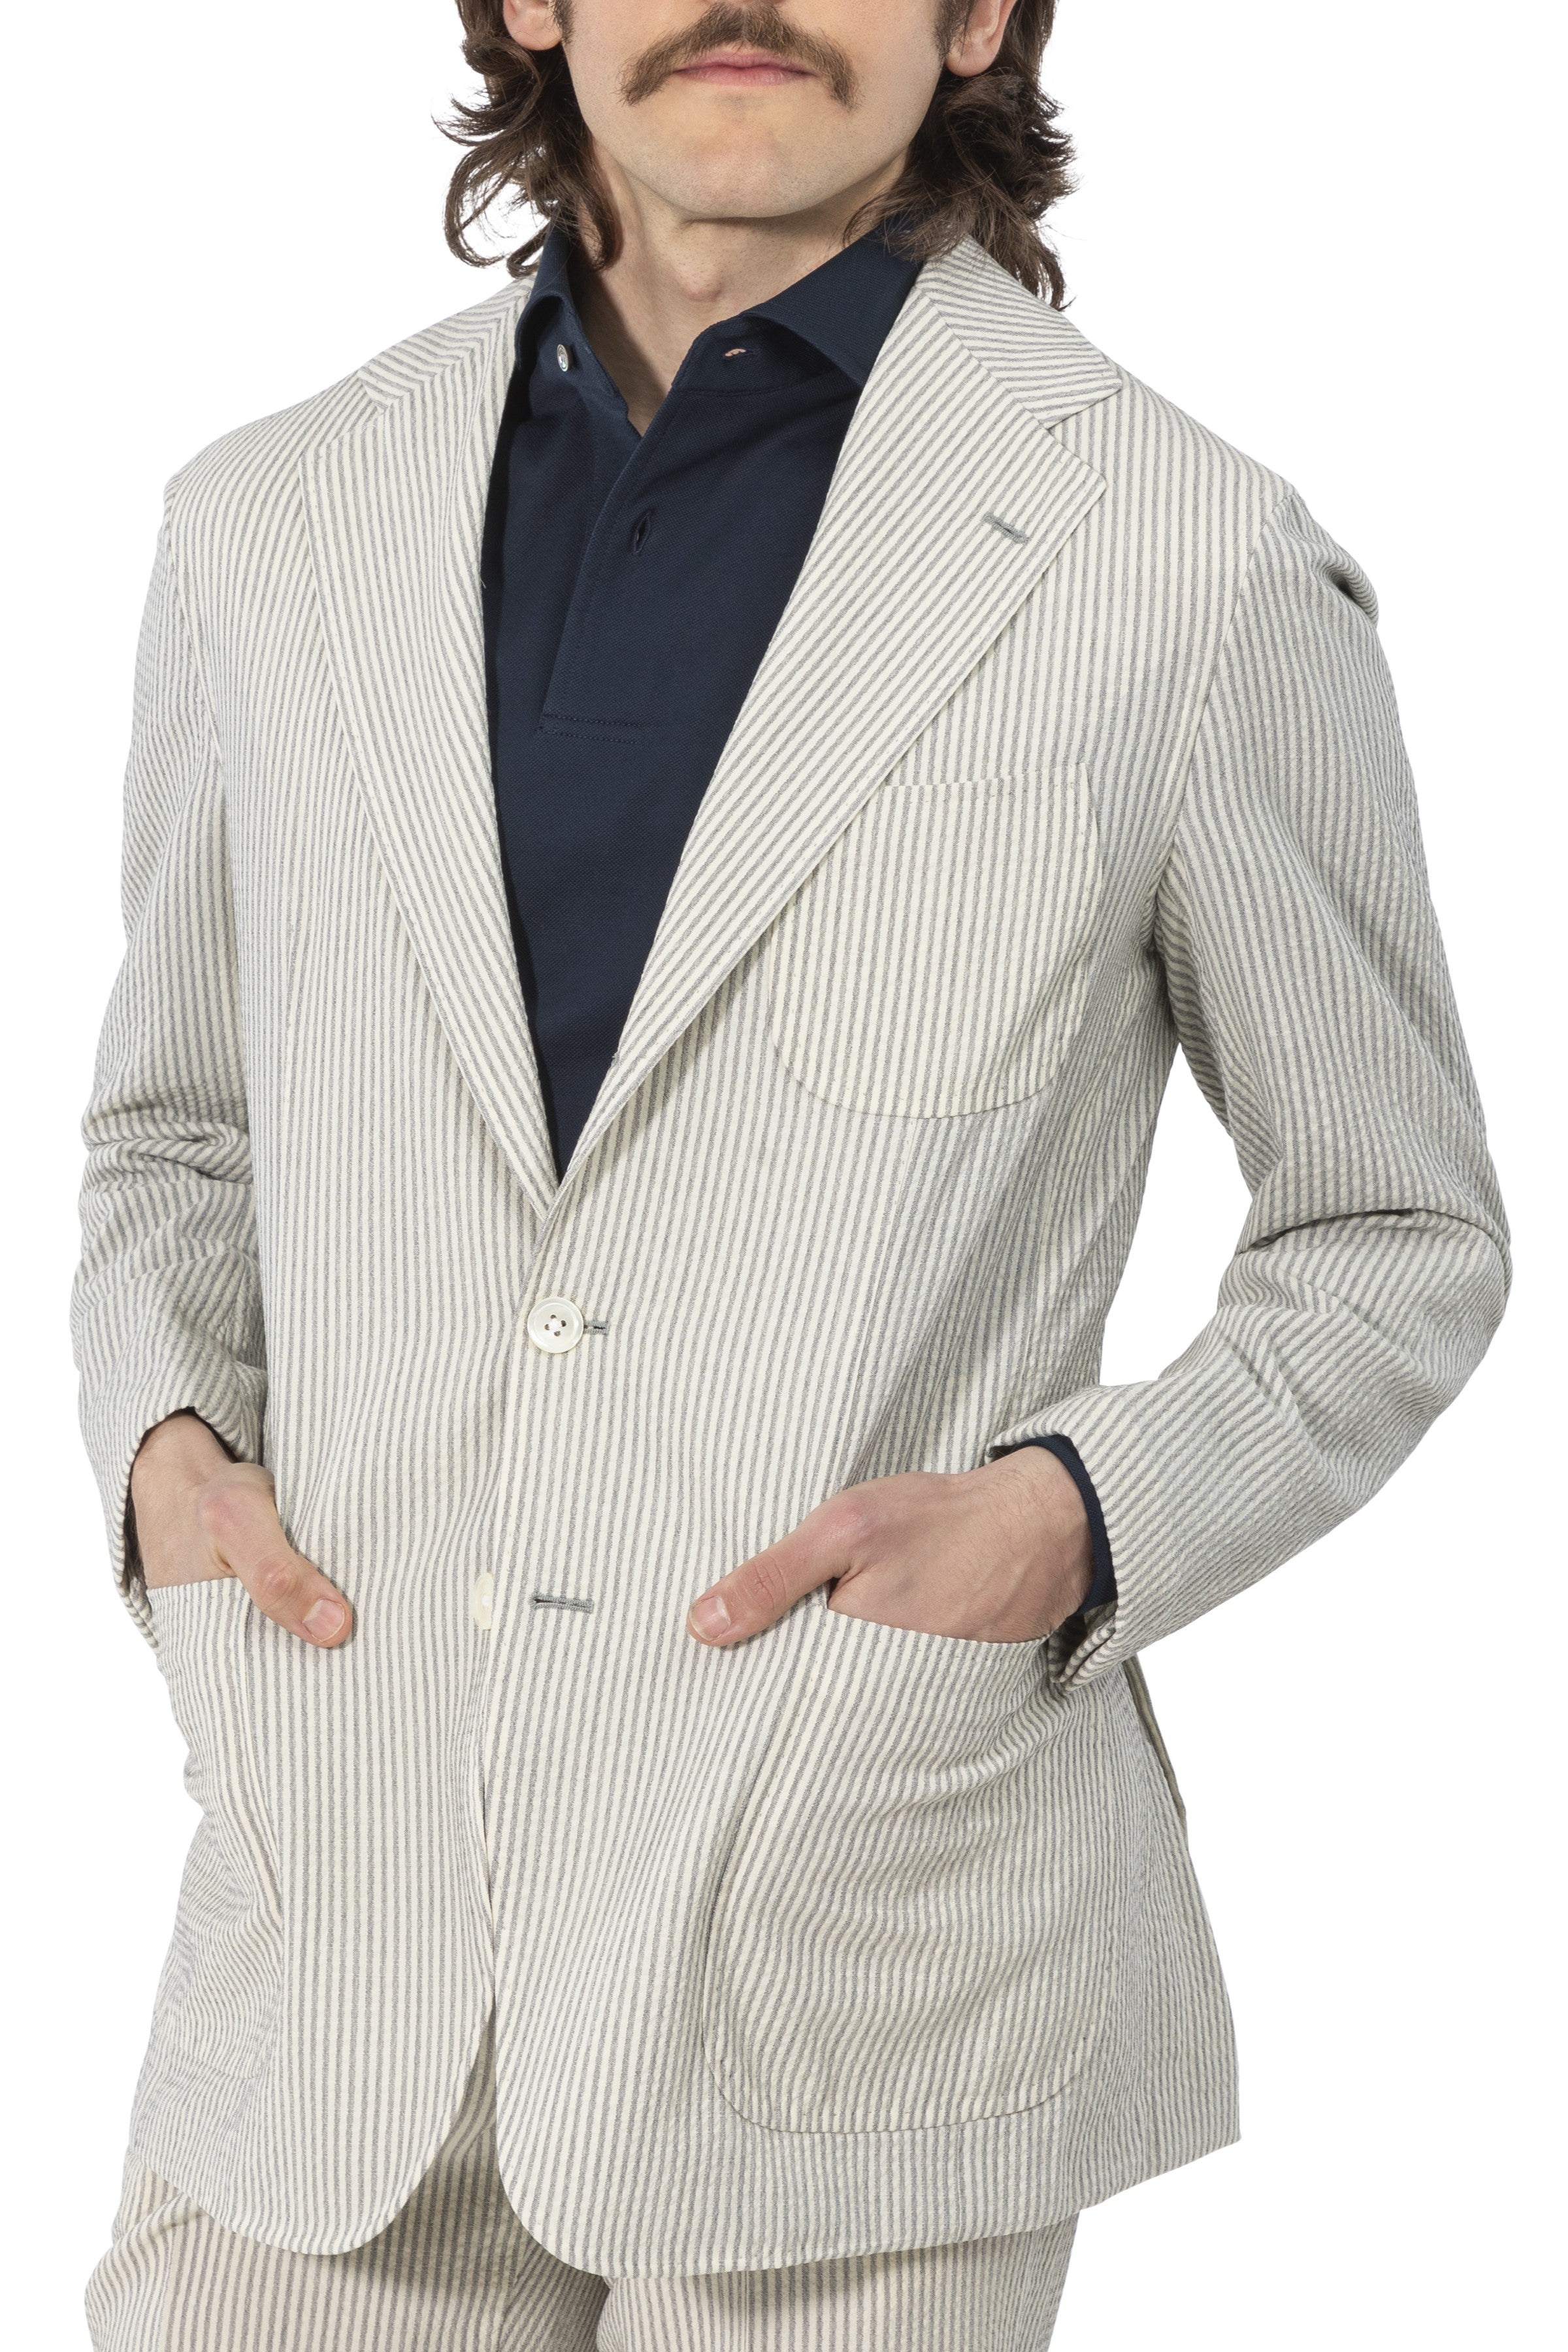 The Armoury by Ring Jacket Model 7A Grey-White Stripe Wool Seersucker Suit